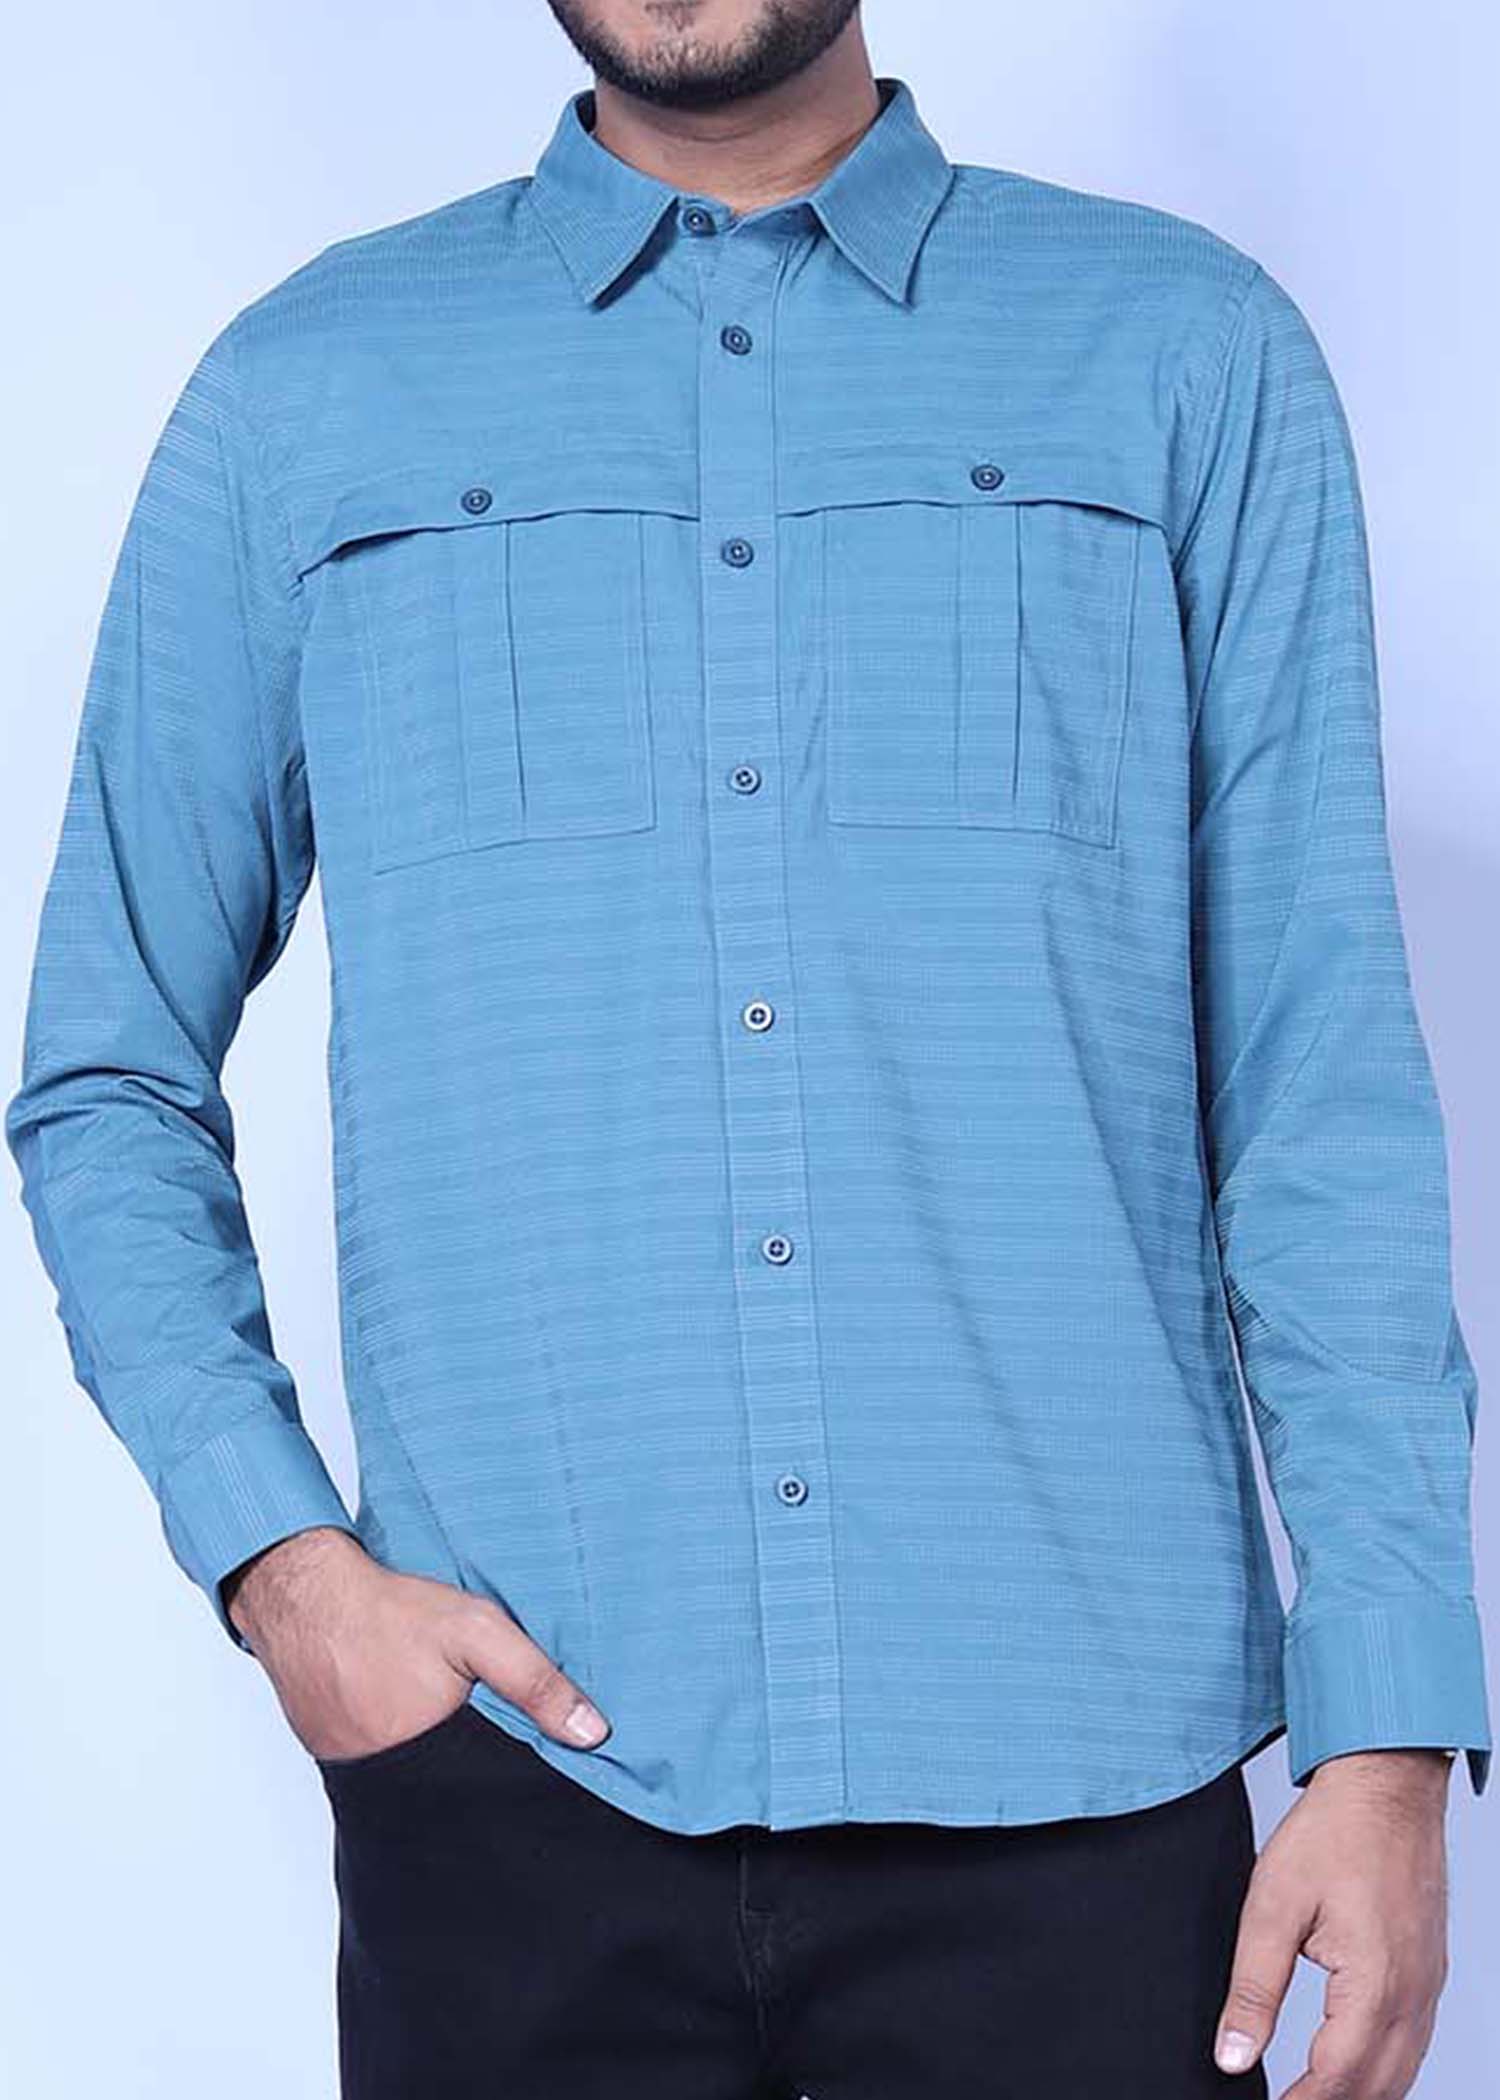 istanbul i fs shirt blue color facecropped